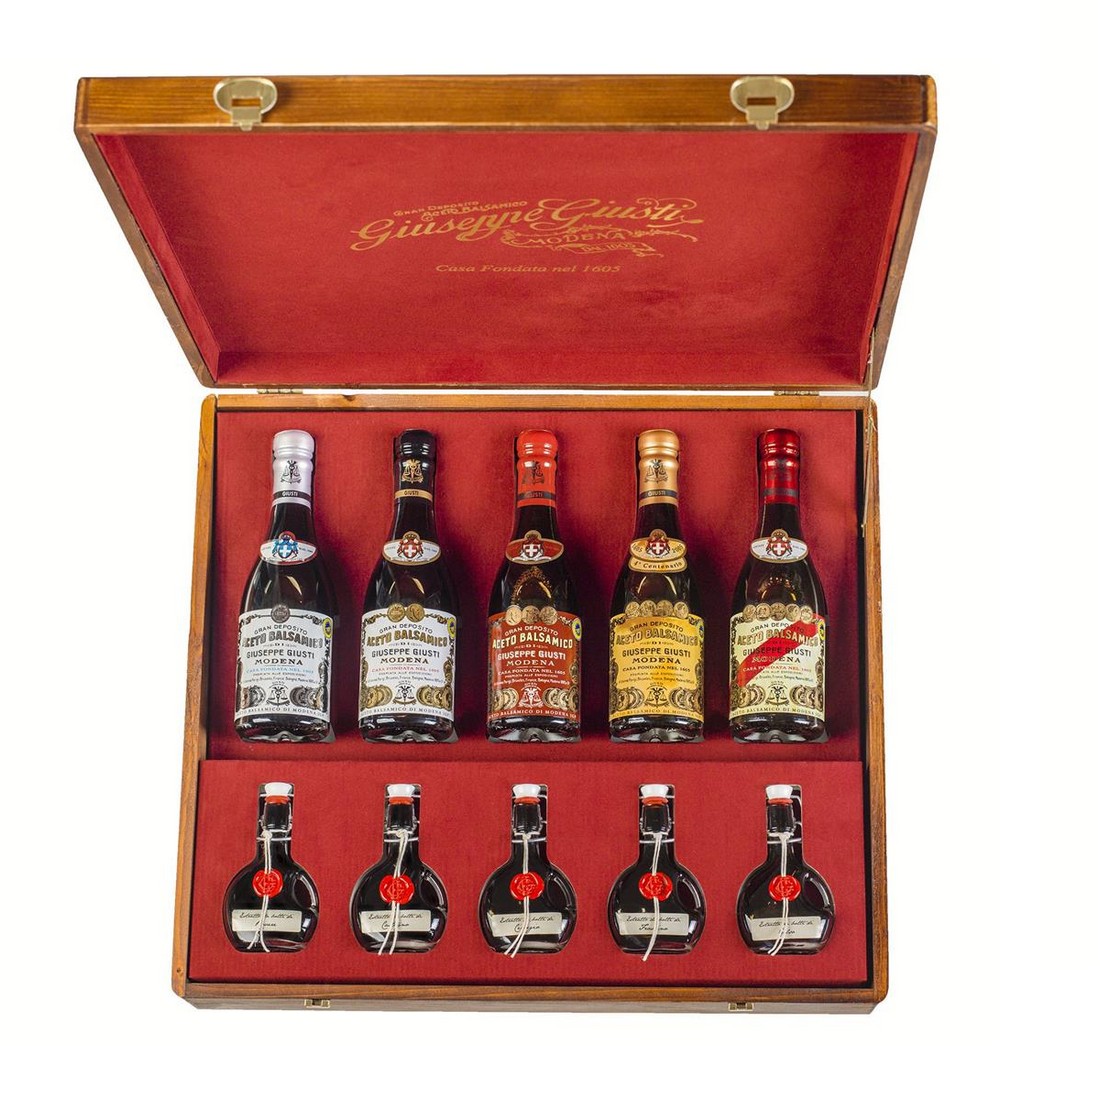 Balsamic Vinegar of Modena IGP - 3 Gold Medals - Anforina Modenese in a 250 ml hatbox